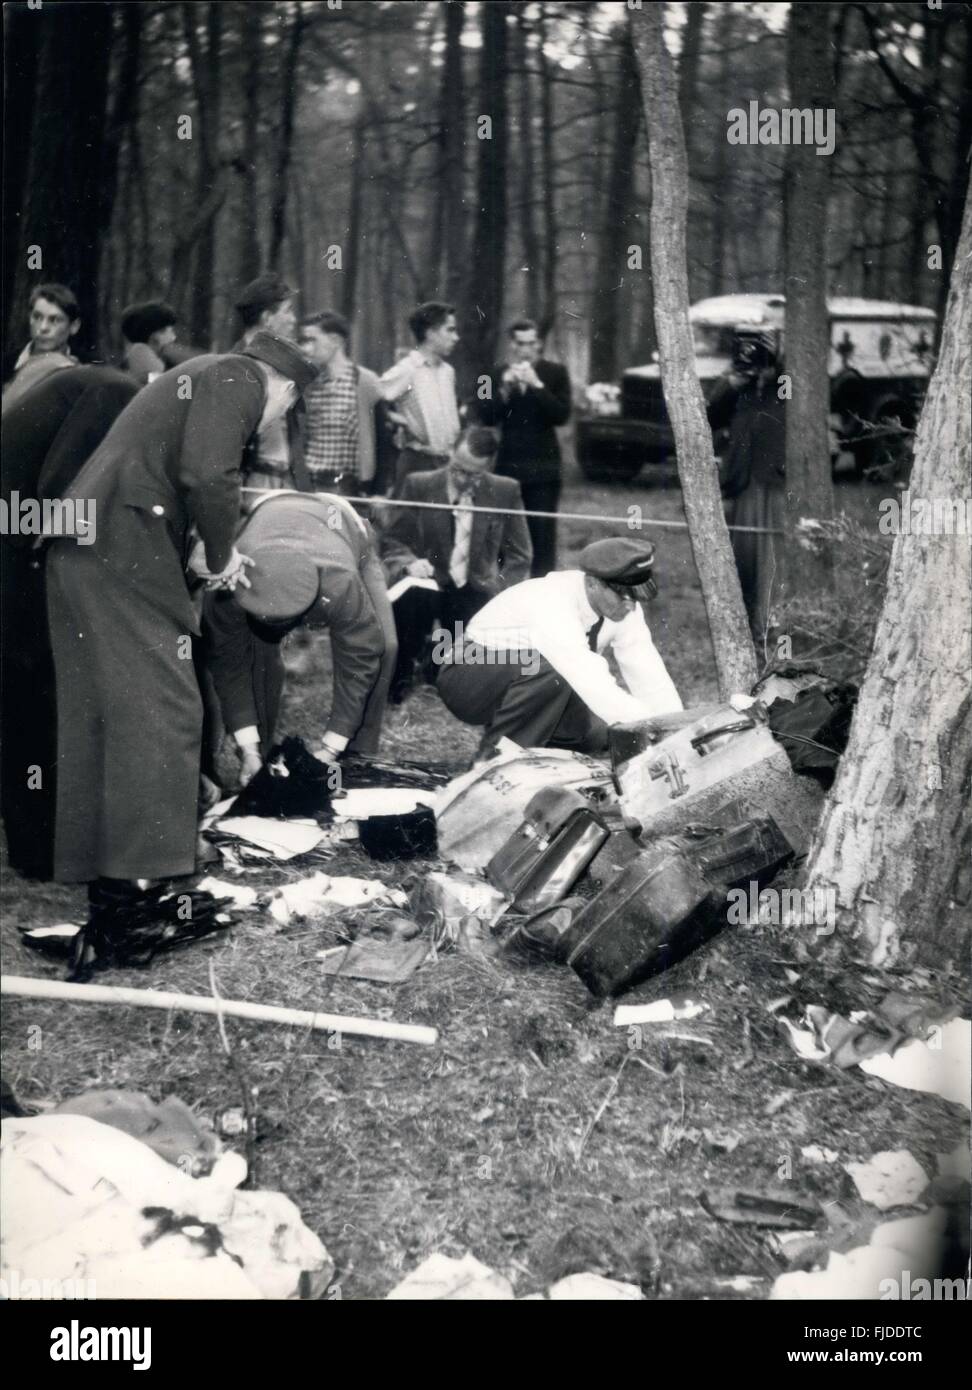 1952 - 44 Killed In Frankfort-Brussels Plane Crash: While taking off from Frankfort on Main airport for Brussels a Belgian Sabena airliner crashed and exploded killing 44 passengers and 4 crewmen. It was Germany's biggest civil aviation disaster after the war. Photo shows German police collect salvaged passengers baggage near the crashed plane. © Keystone Pictures USA/ZUMAPRESS.com/Alamy Live News Stock Photo